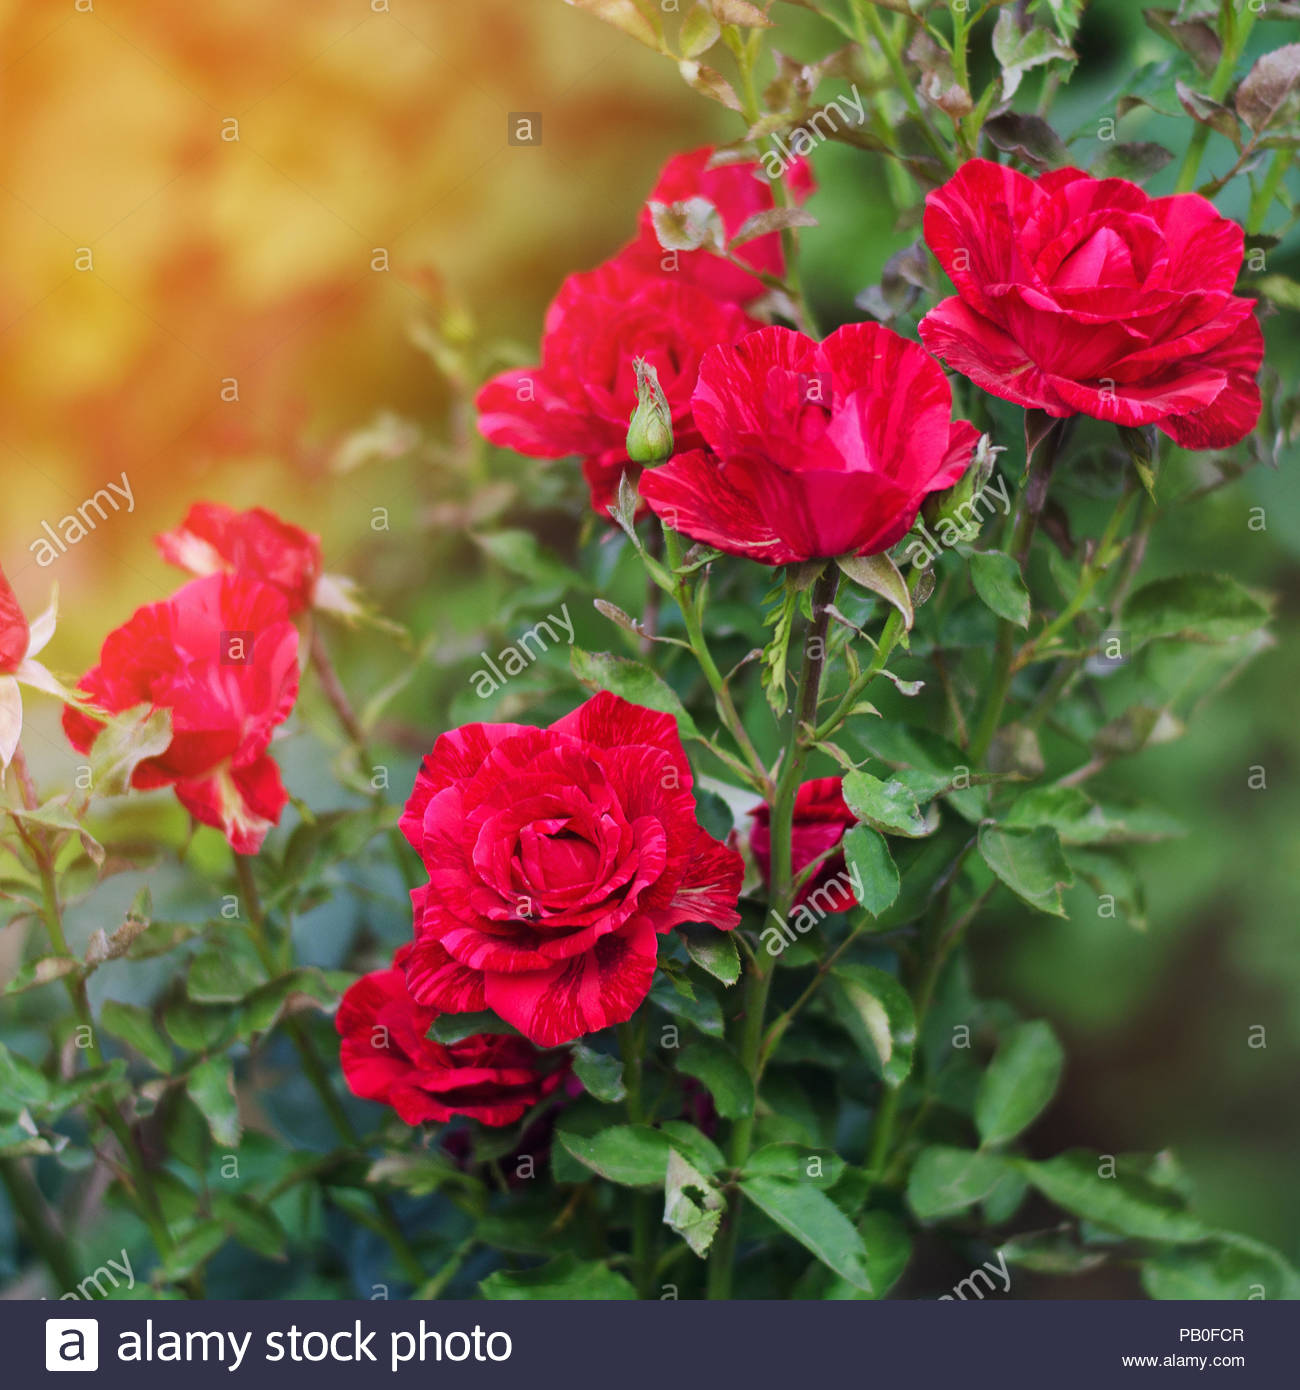 Beautiful Red Roses In The Garden Nature Wallpaper Flowers Bush